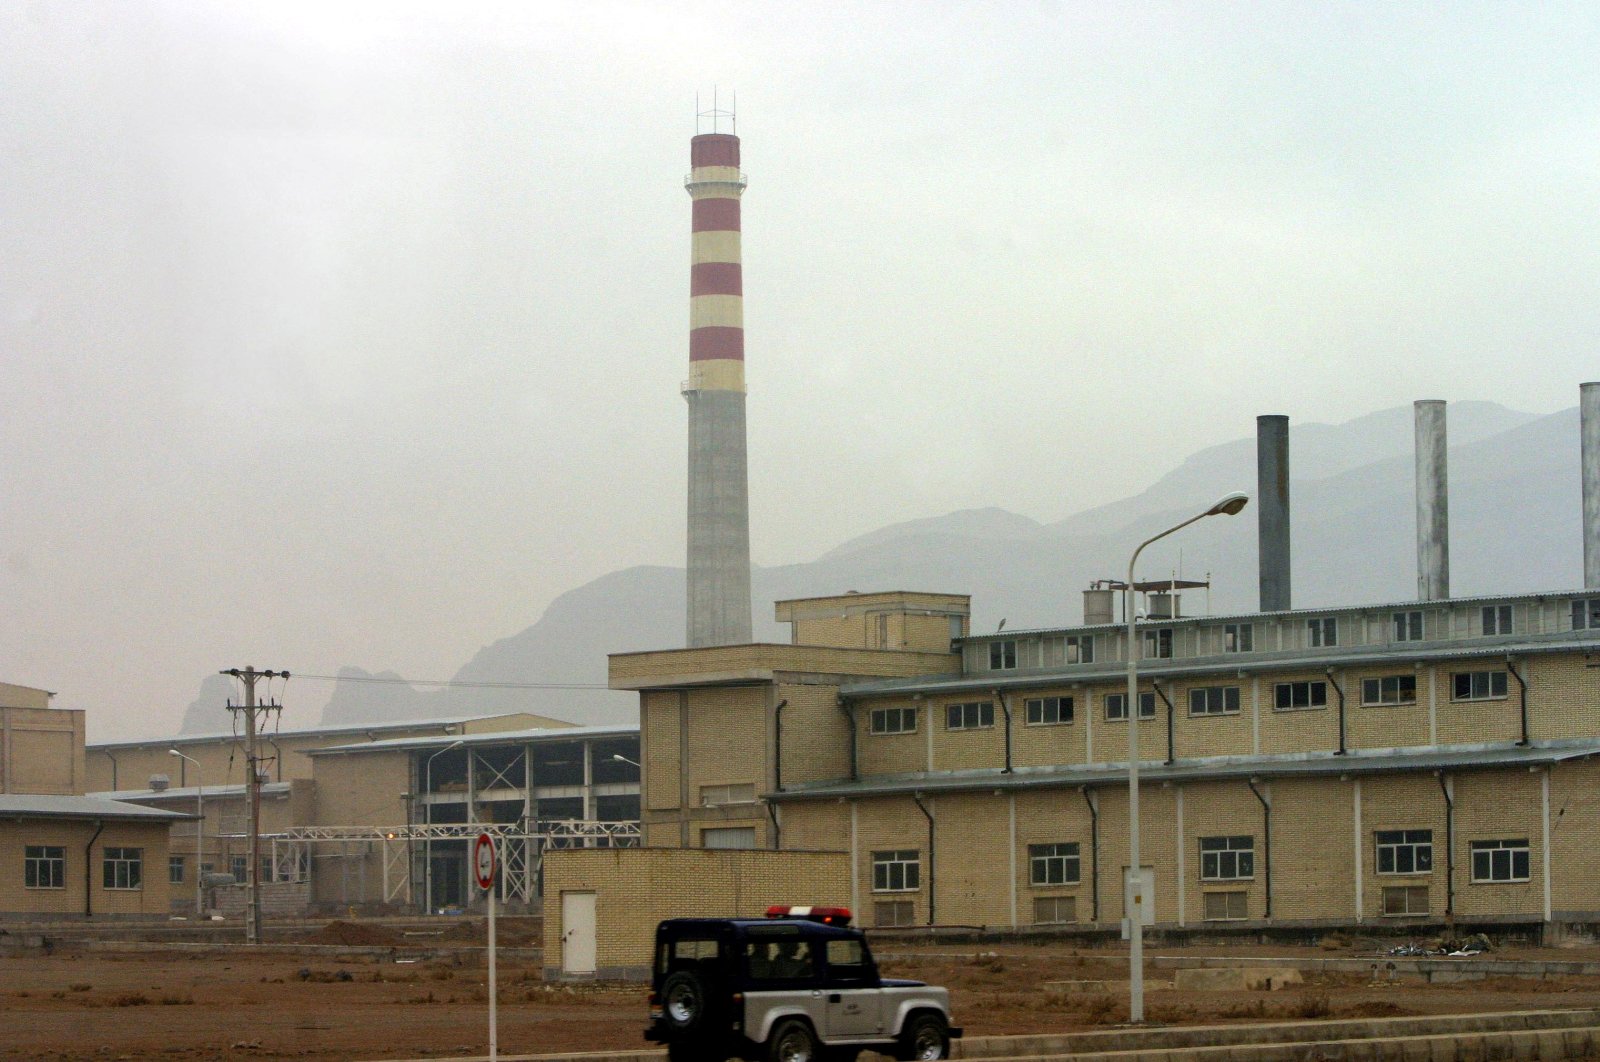 A security car passes in front of the Natanz nuclear facility 300 kilometers (186.4 miles) south of Tehran, Iran, Nov. 20, 2004. (Reuters Photo)